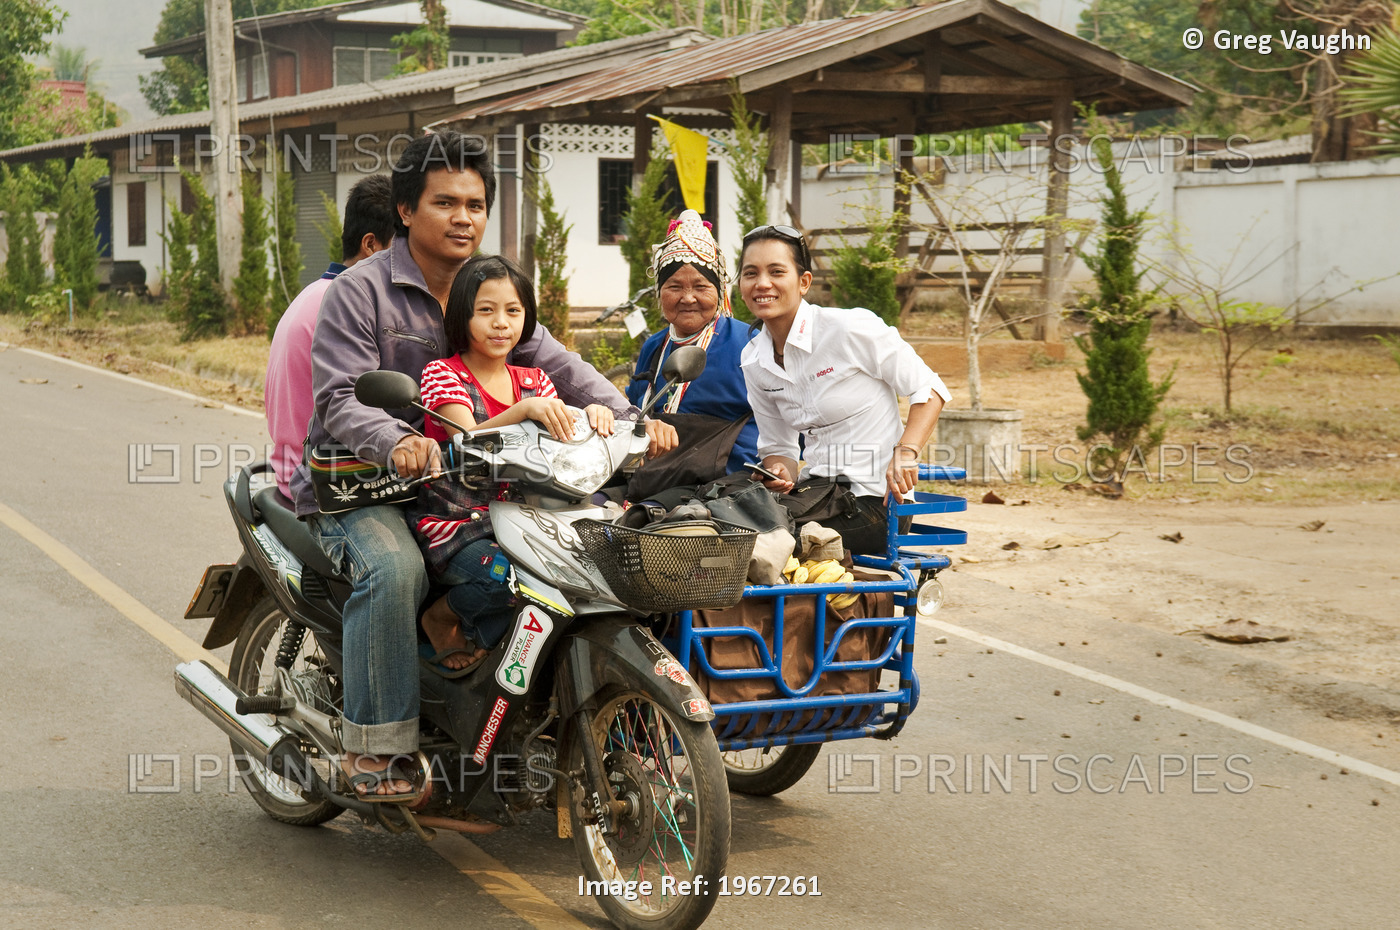 Thailand, Chiang Mai Province, Family Riding Motorcycle And Sidecar Through ...